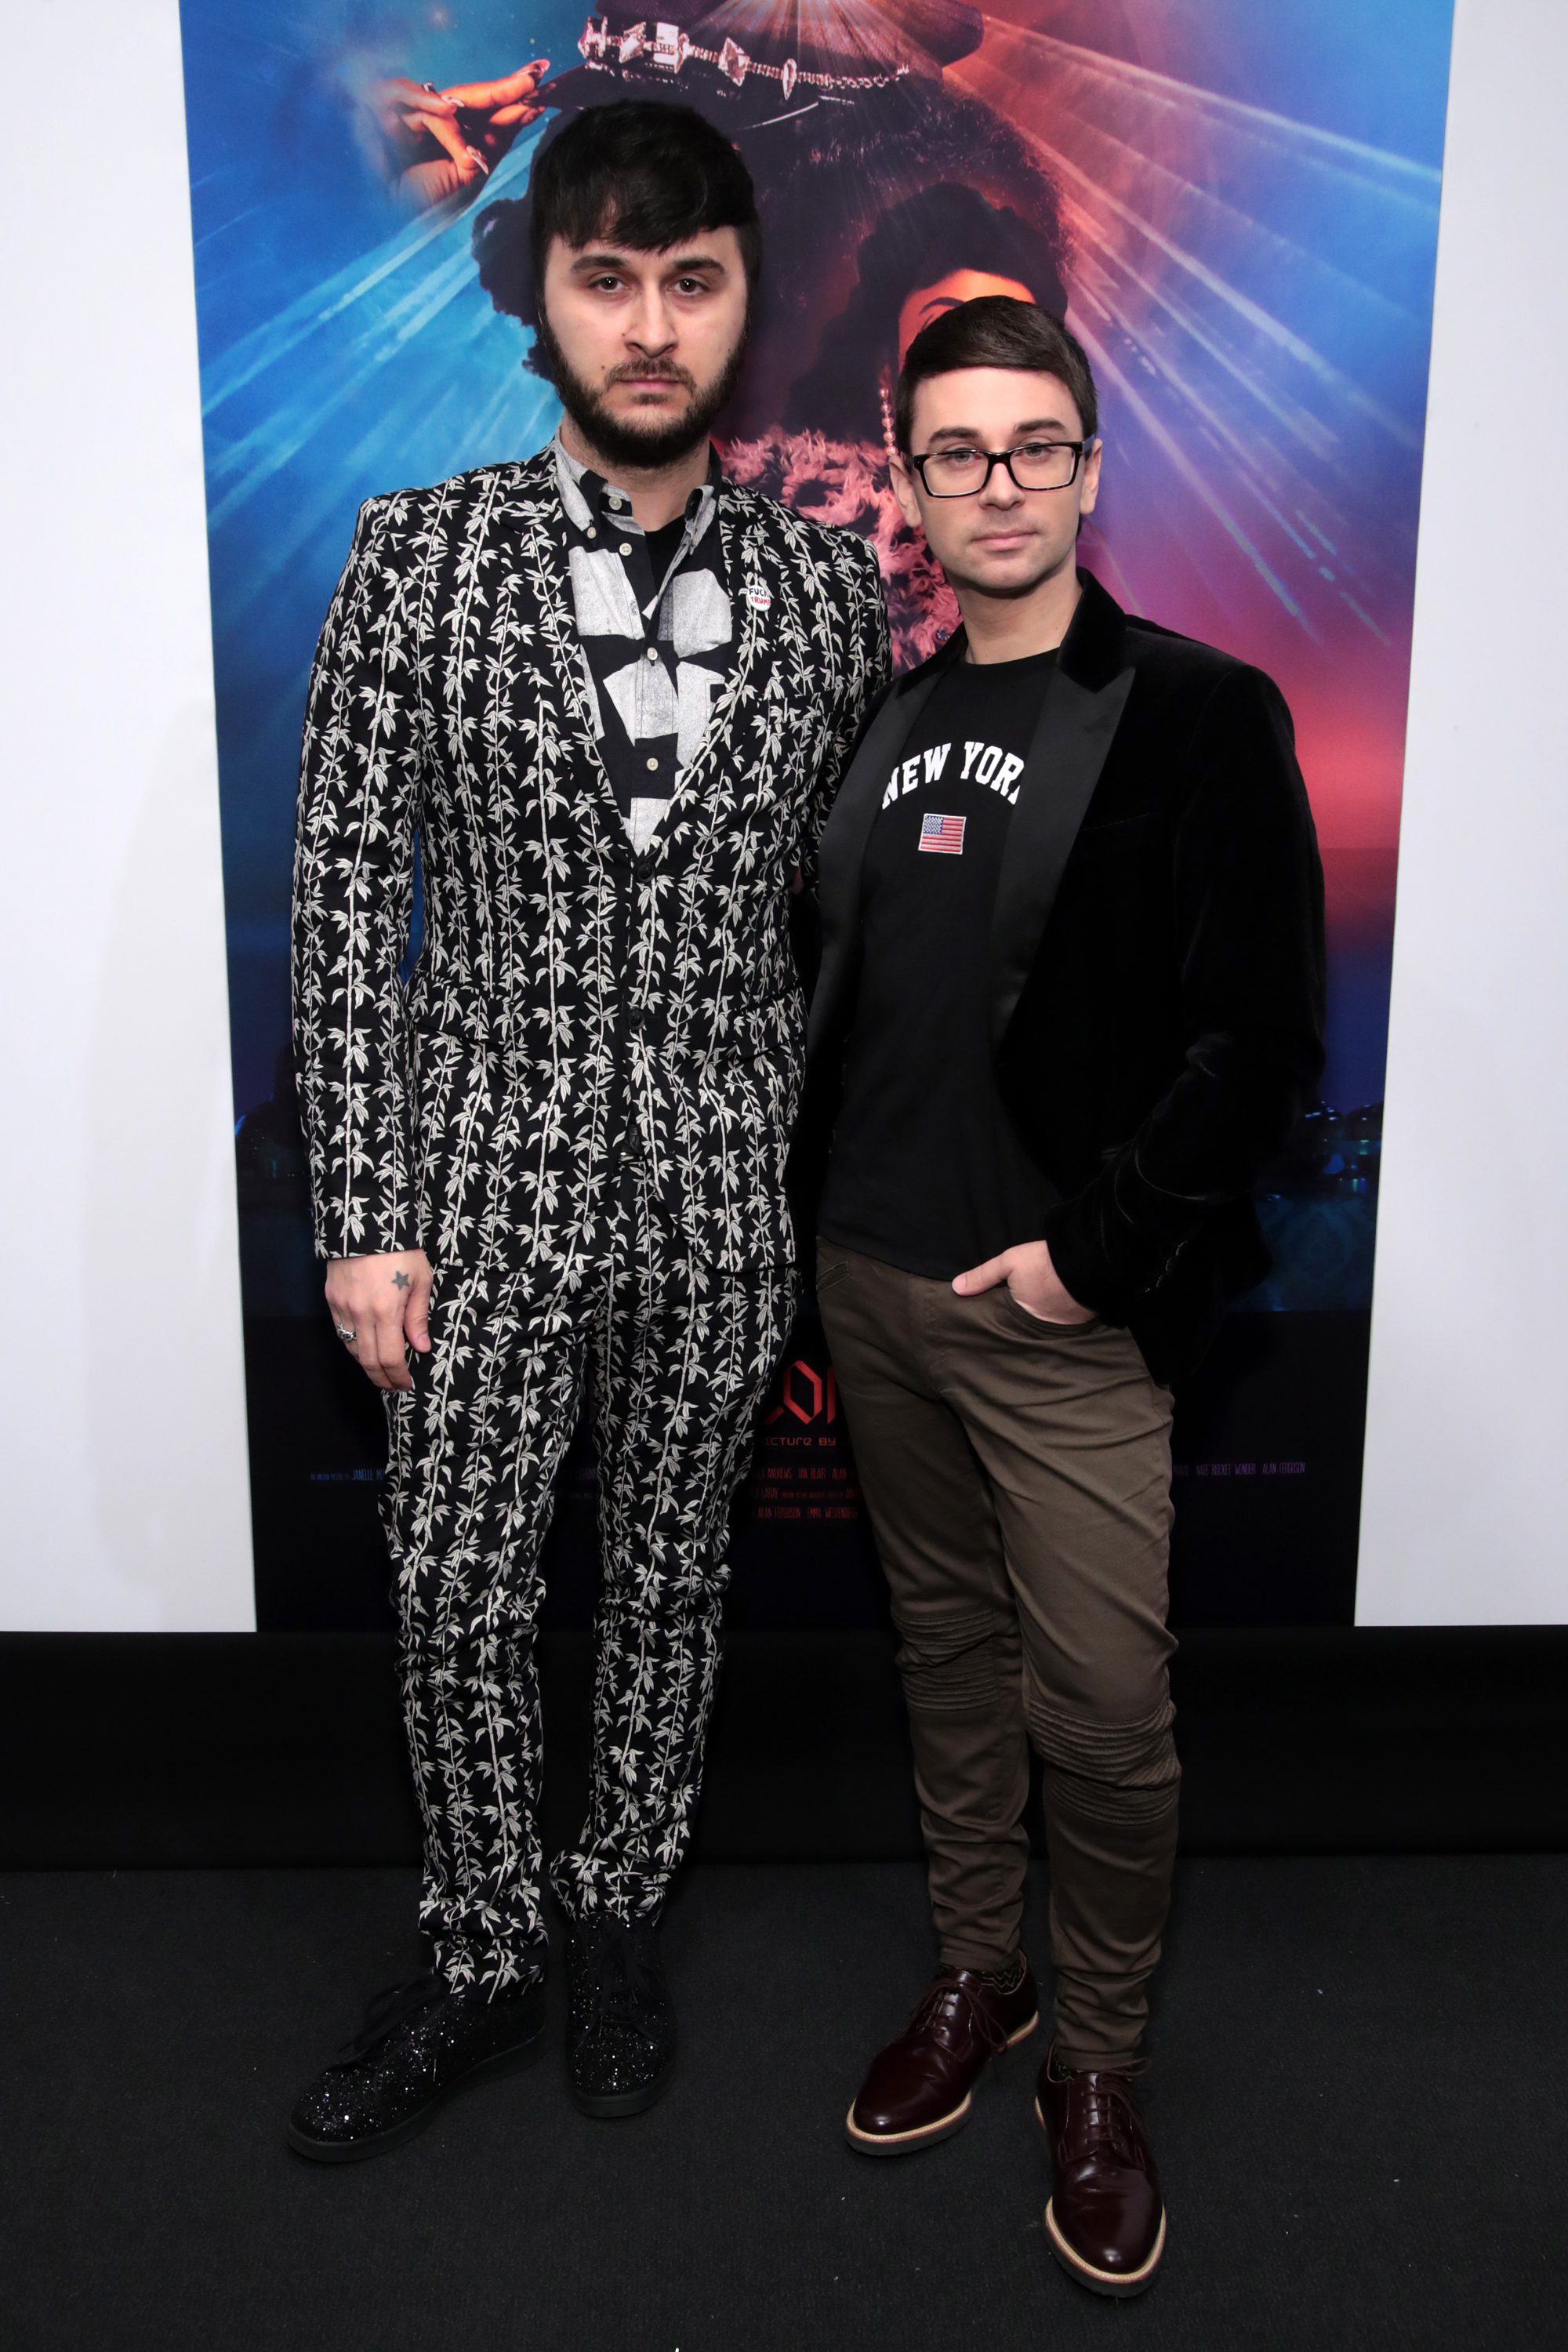 Christian and Brad at a media event